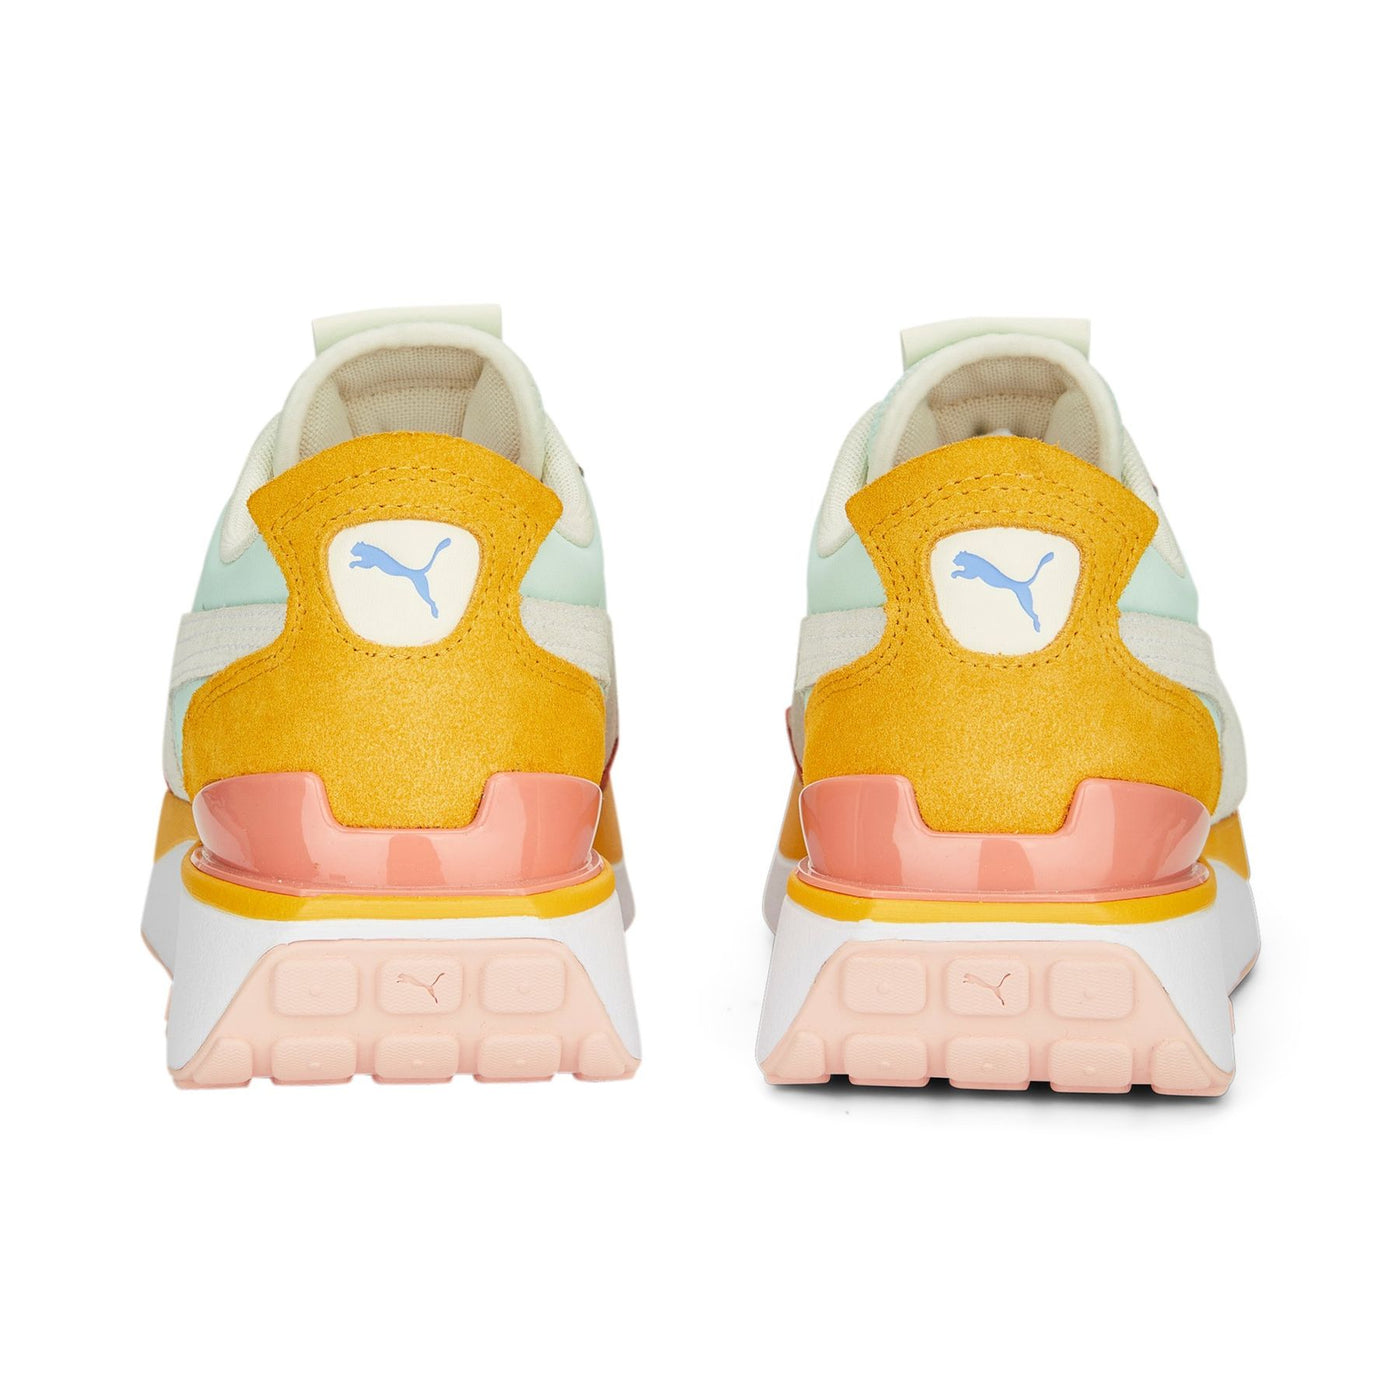 SNEAKERS PUMA CRUISE RIDER CANDY DONNA